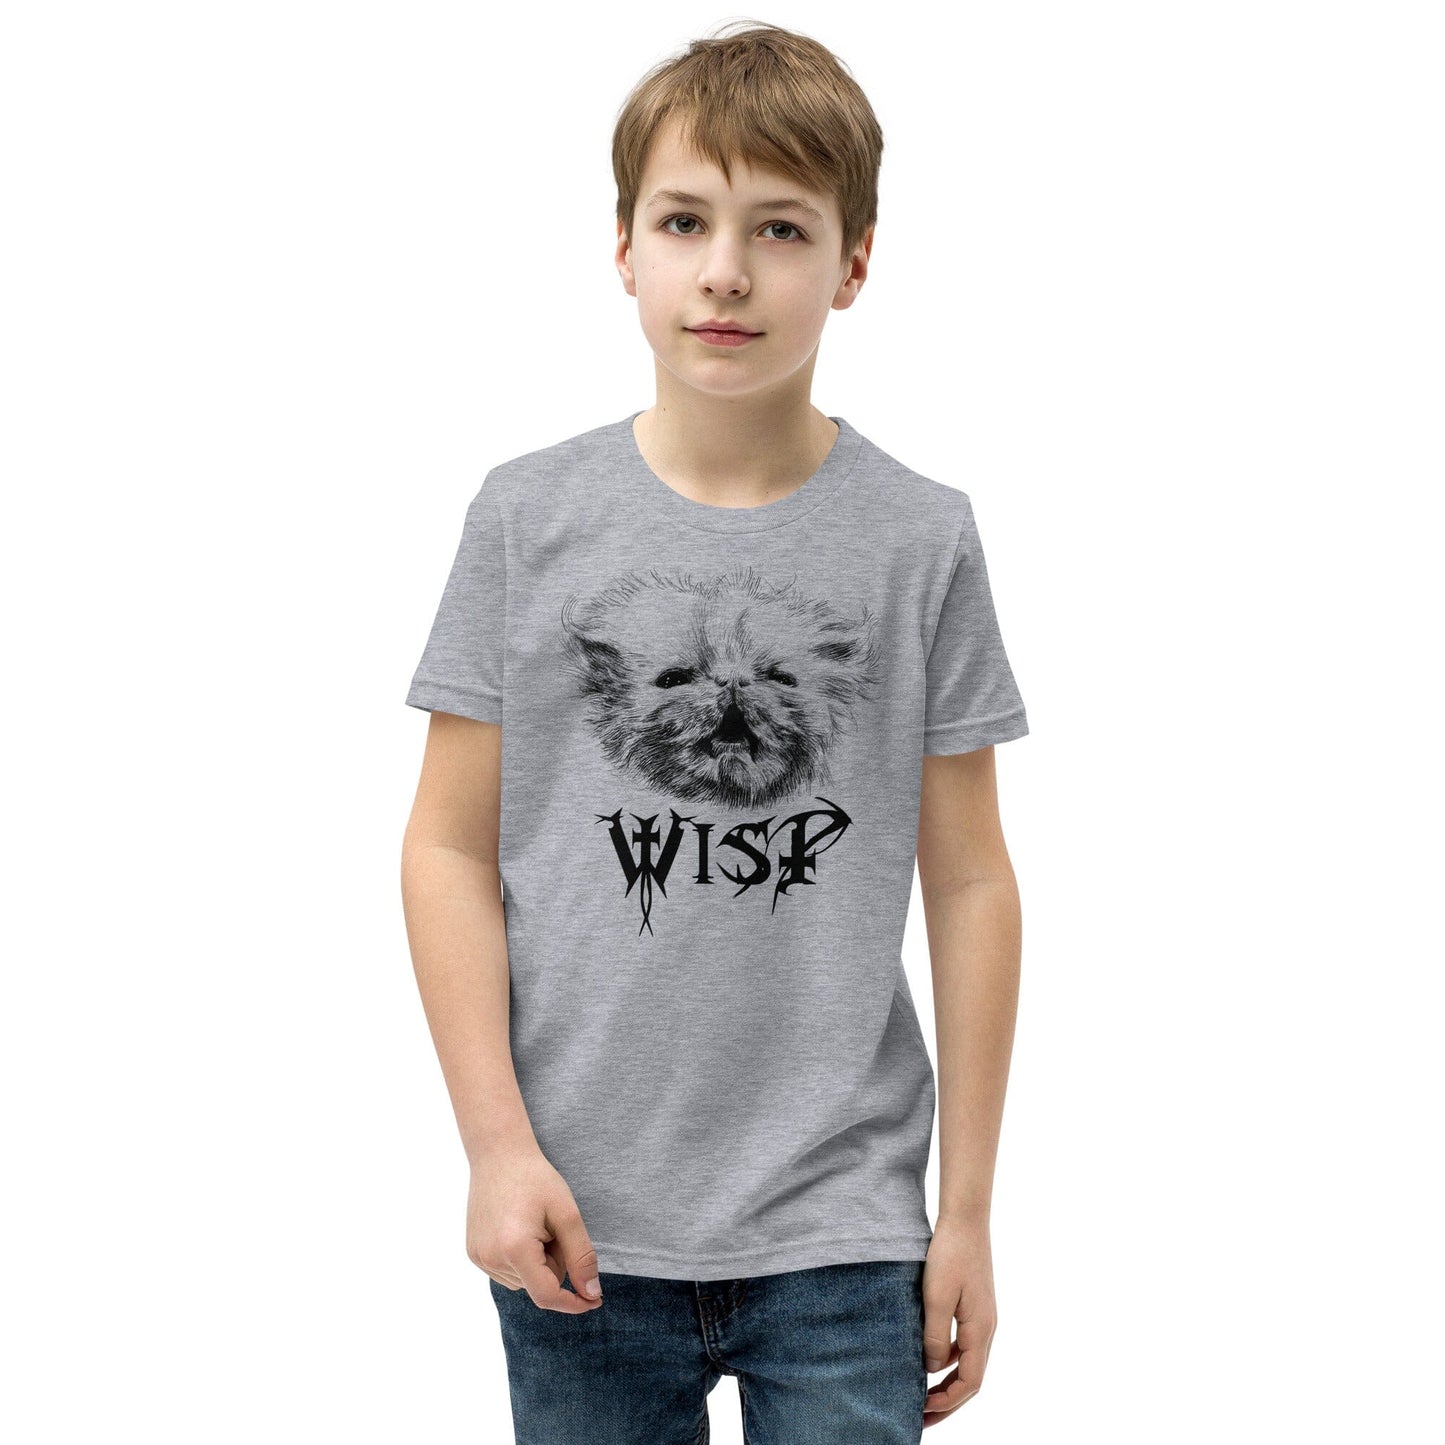 Metal Wisp YOUTH T-Shirt [Unfoiled] (All net proceeds go to Rags to Riches Animal Rescue) JoyousJoyfulJoyness Athletic Heather S 